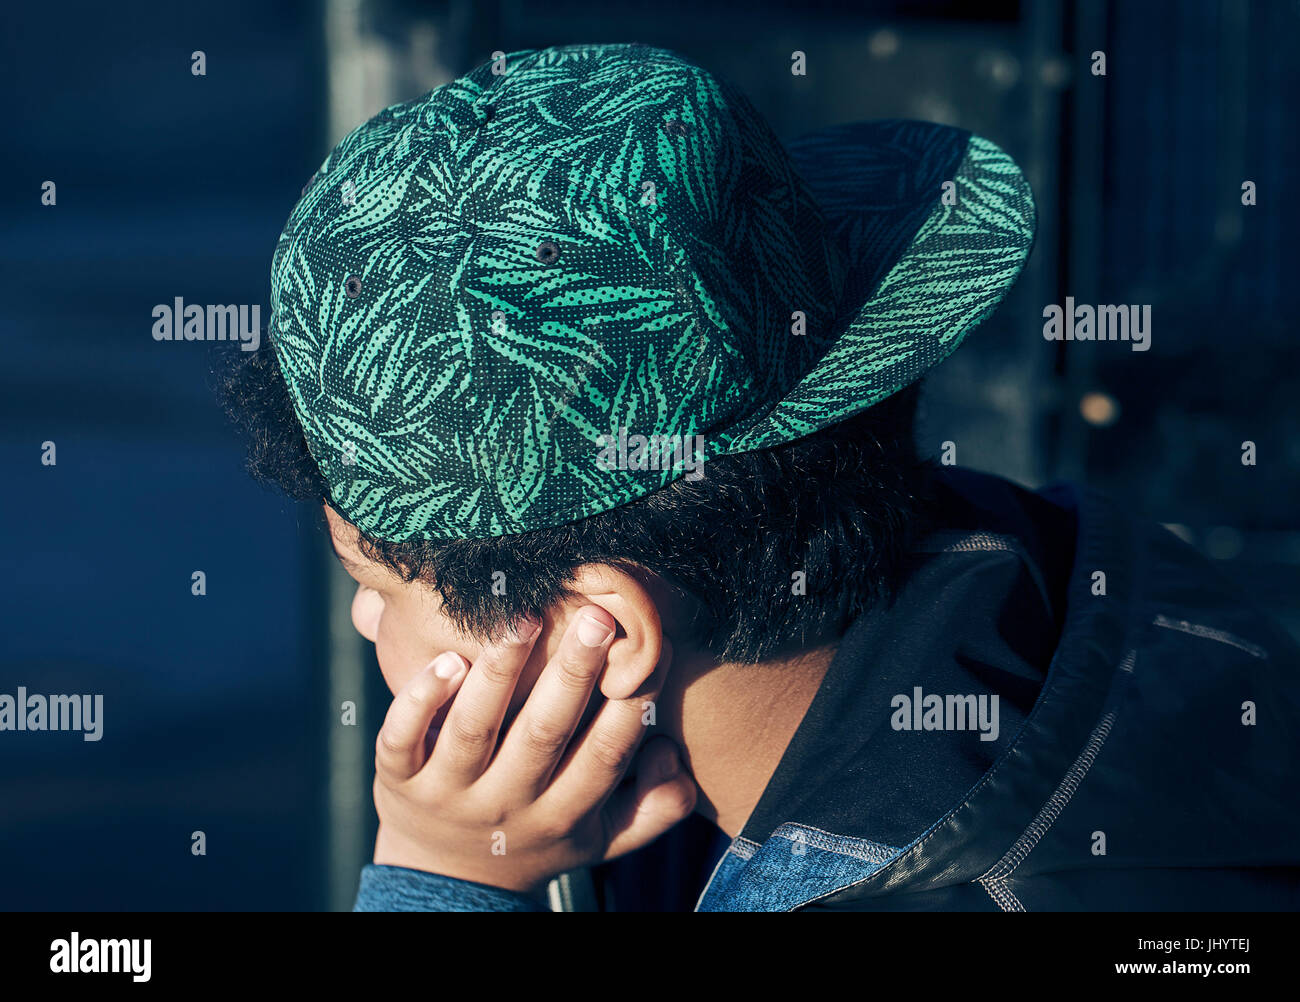 Young boy. Stock Photo